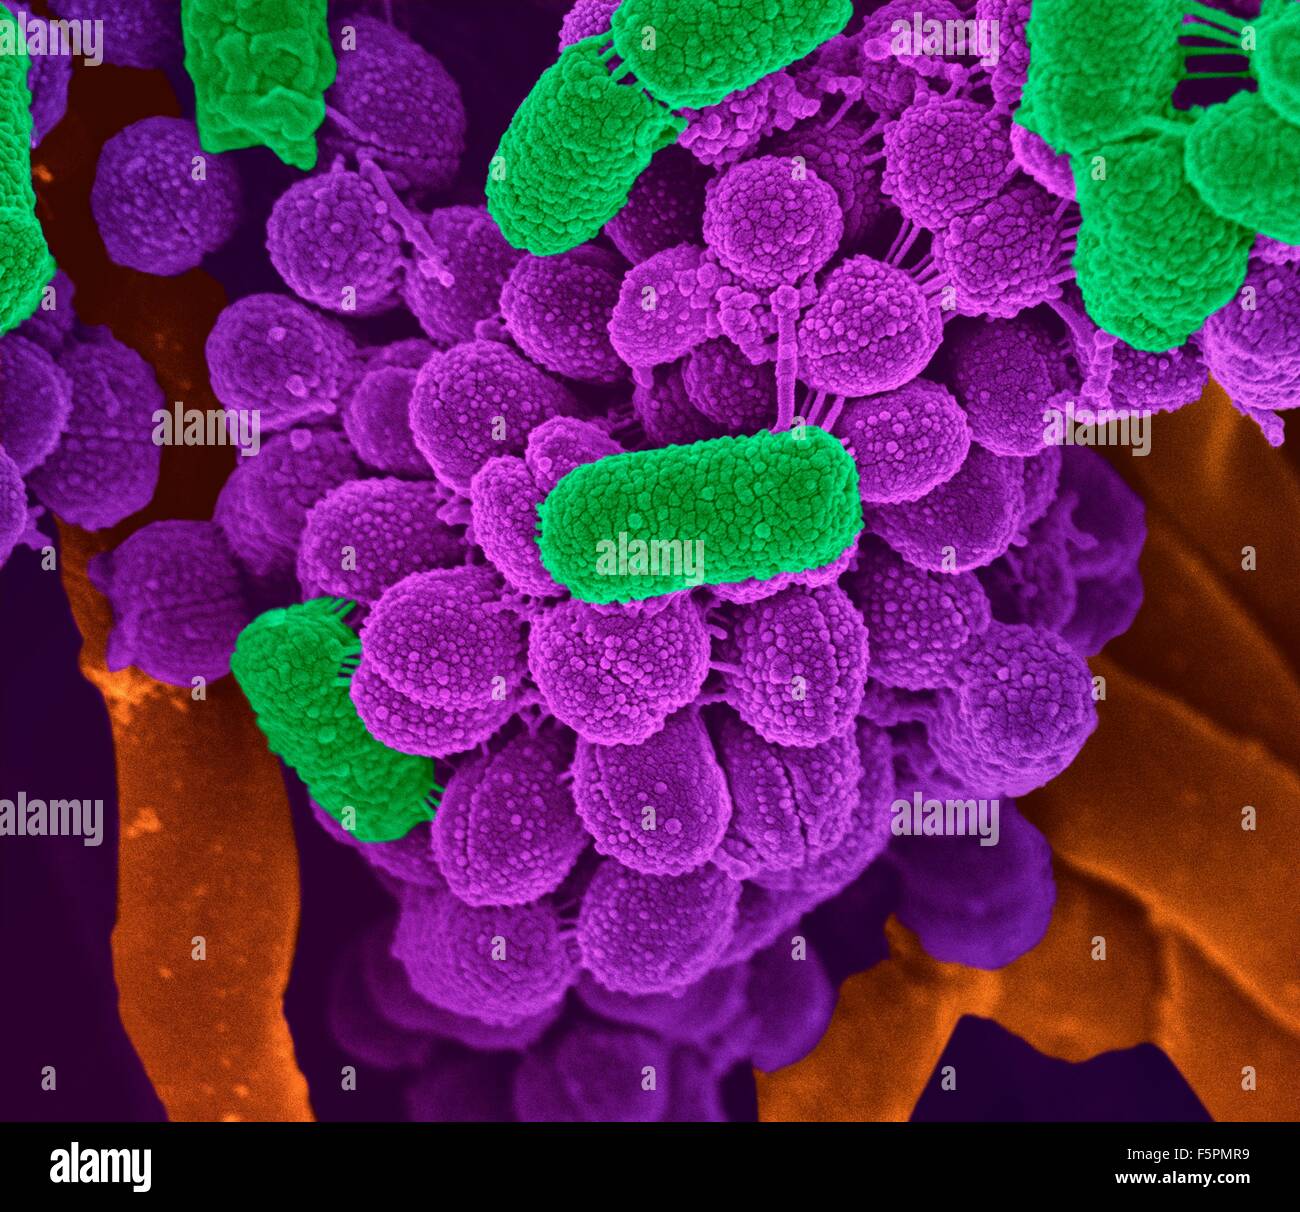 Oral bacteria. Coloured scanning electron micrograph (SEM) of mixed oral bacteria (cocci and bacilli). Stock Photo